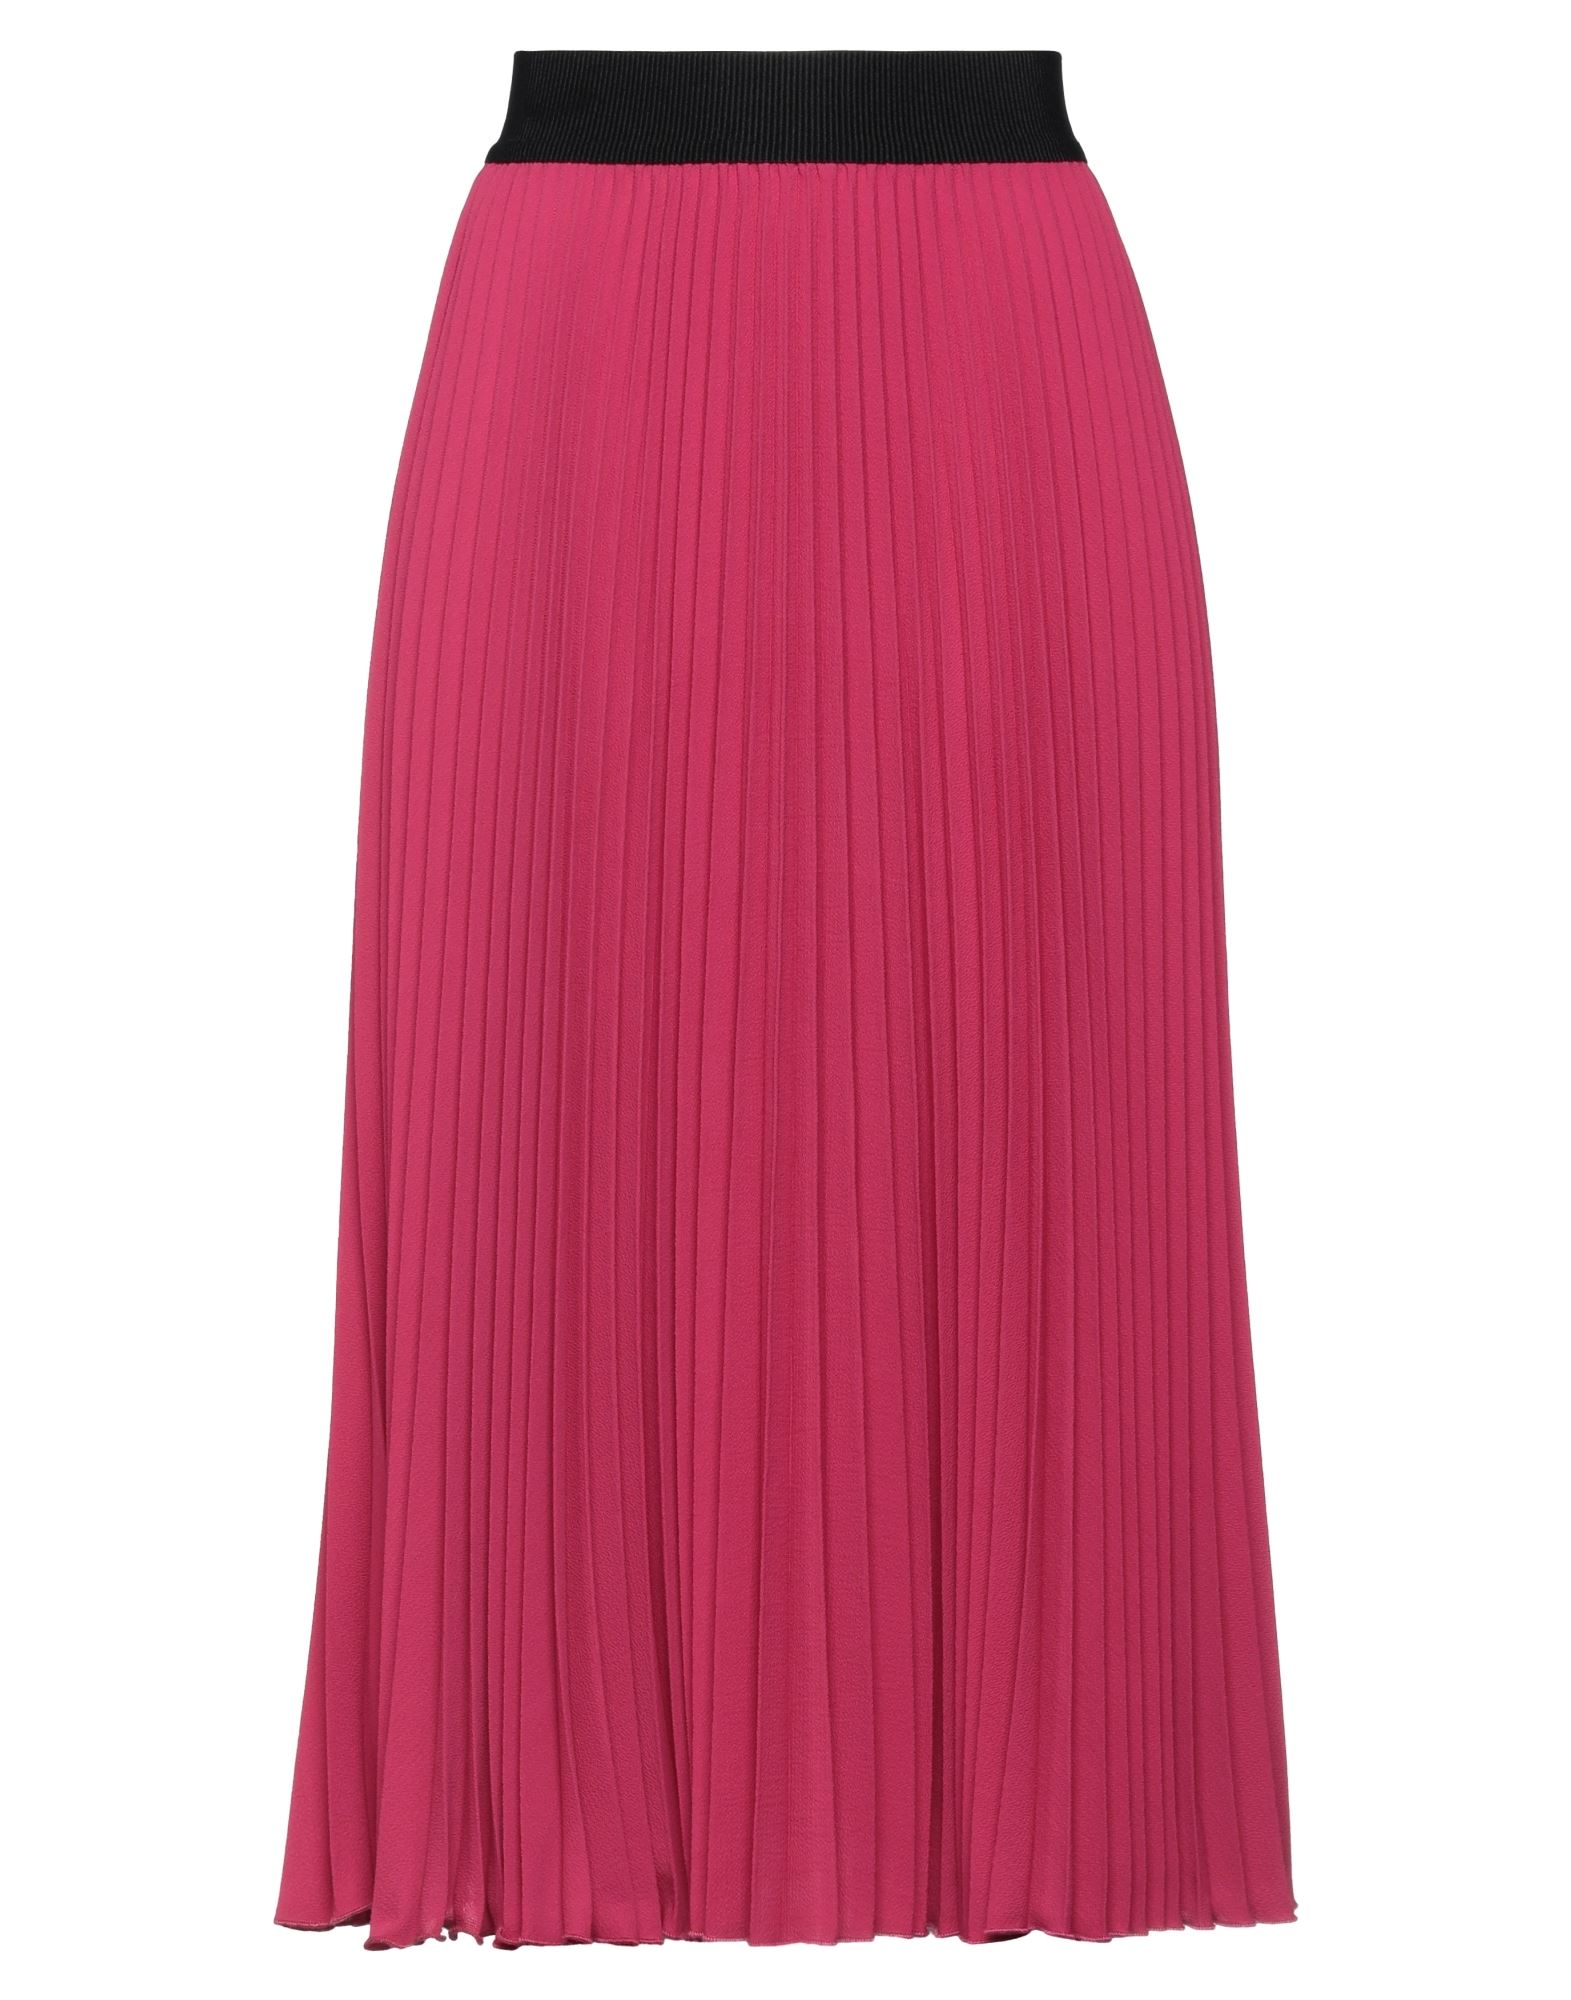 Shirtaporter Midi Skirts In Red